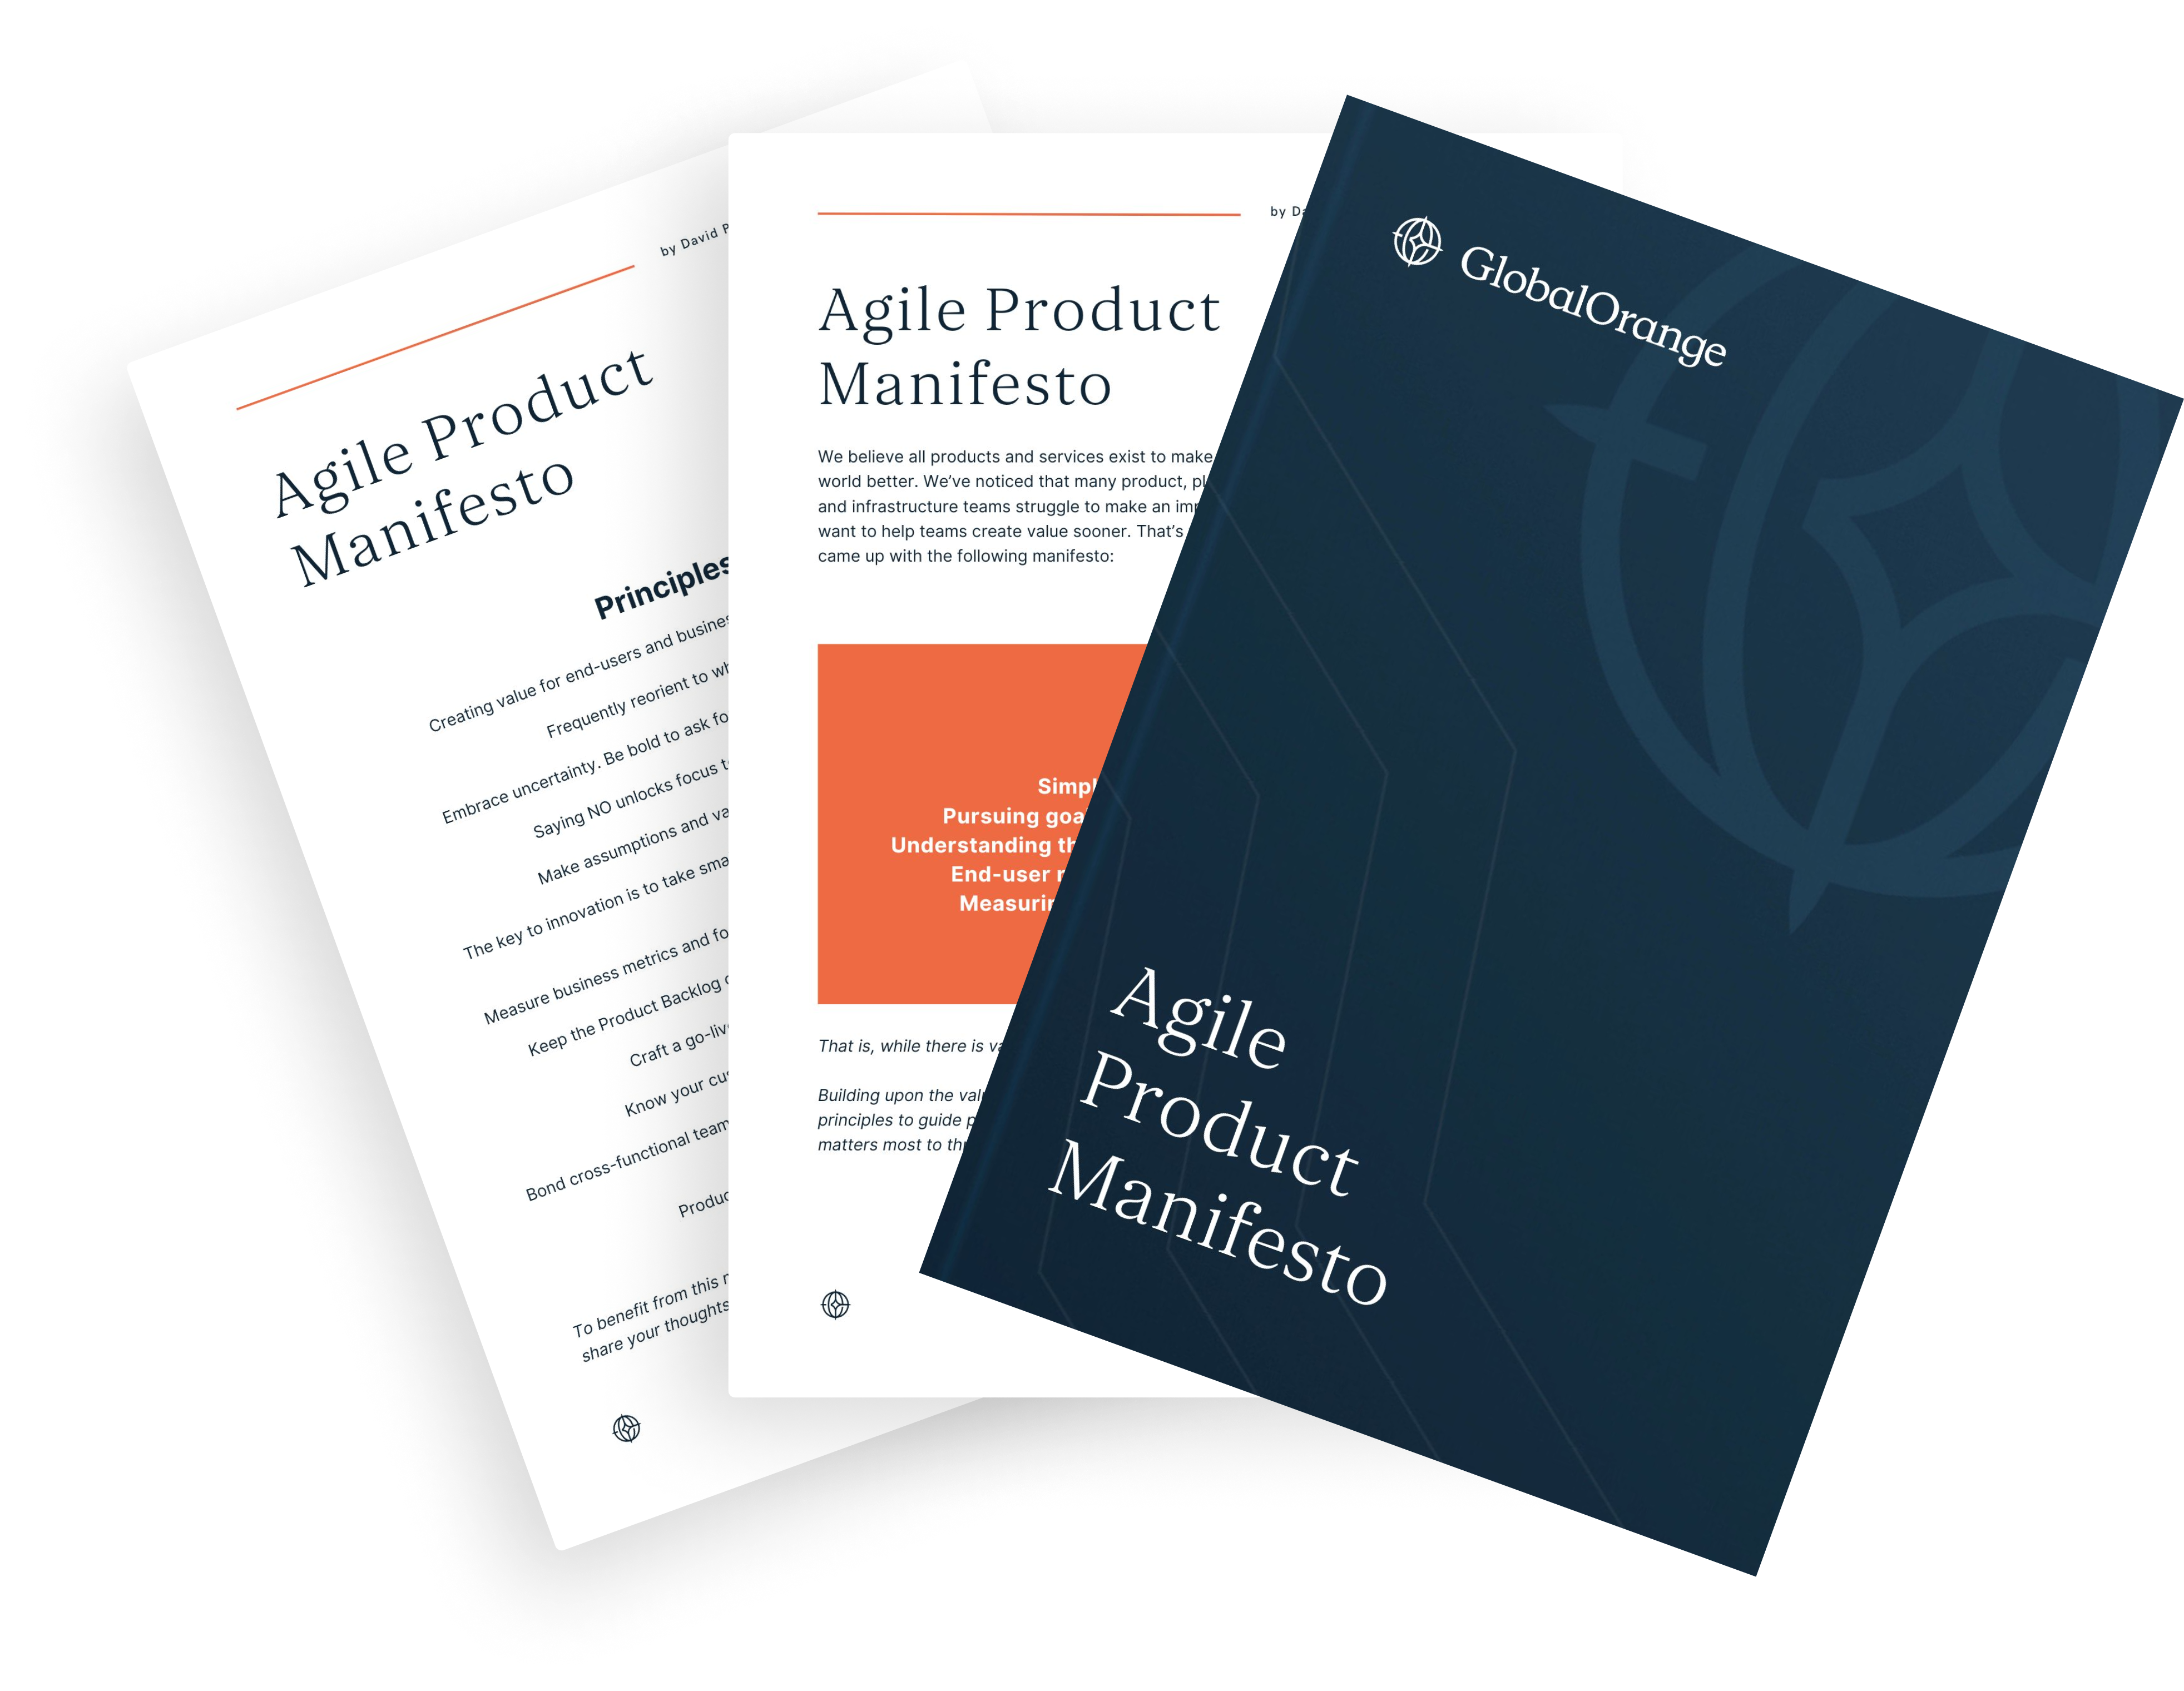 Apply the updated Agile Product Manifesto to create value faster